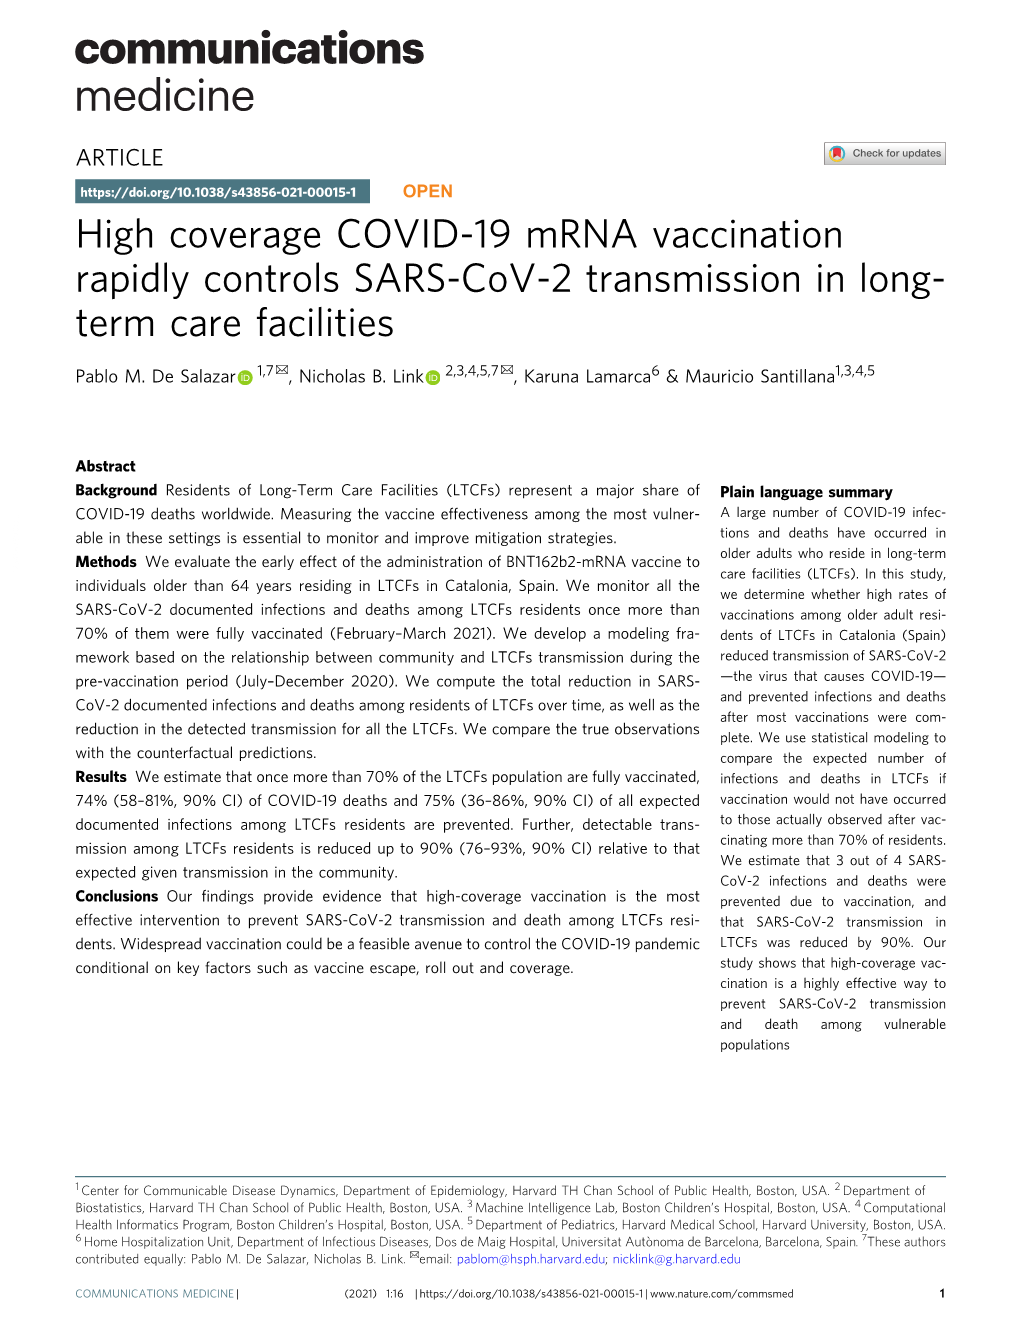 High Coverage COVID-19 Mrna Vaccination Rapidly Controls SARS-Cov-2 Transmission in Long- Term Care Facilities ✉ ✉ Pablo M